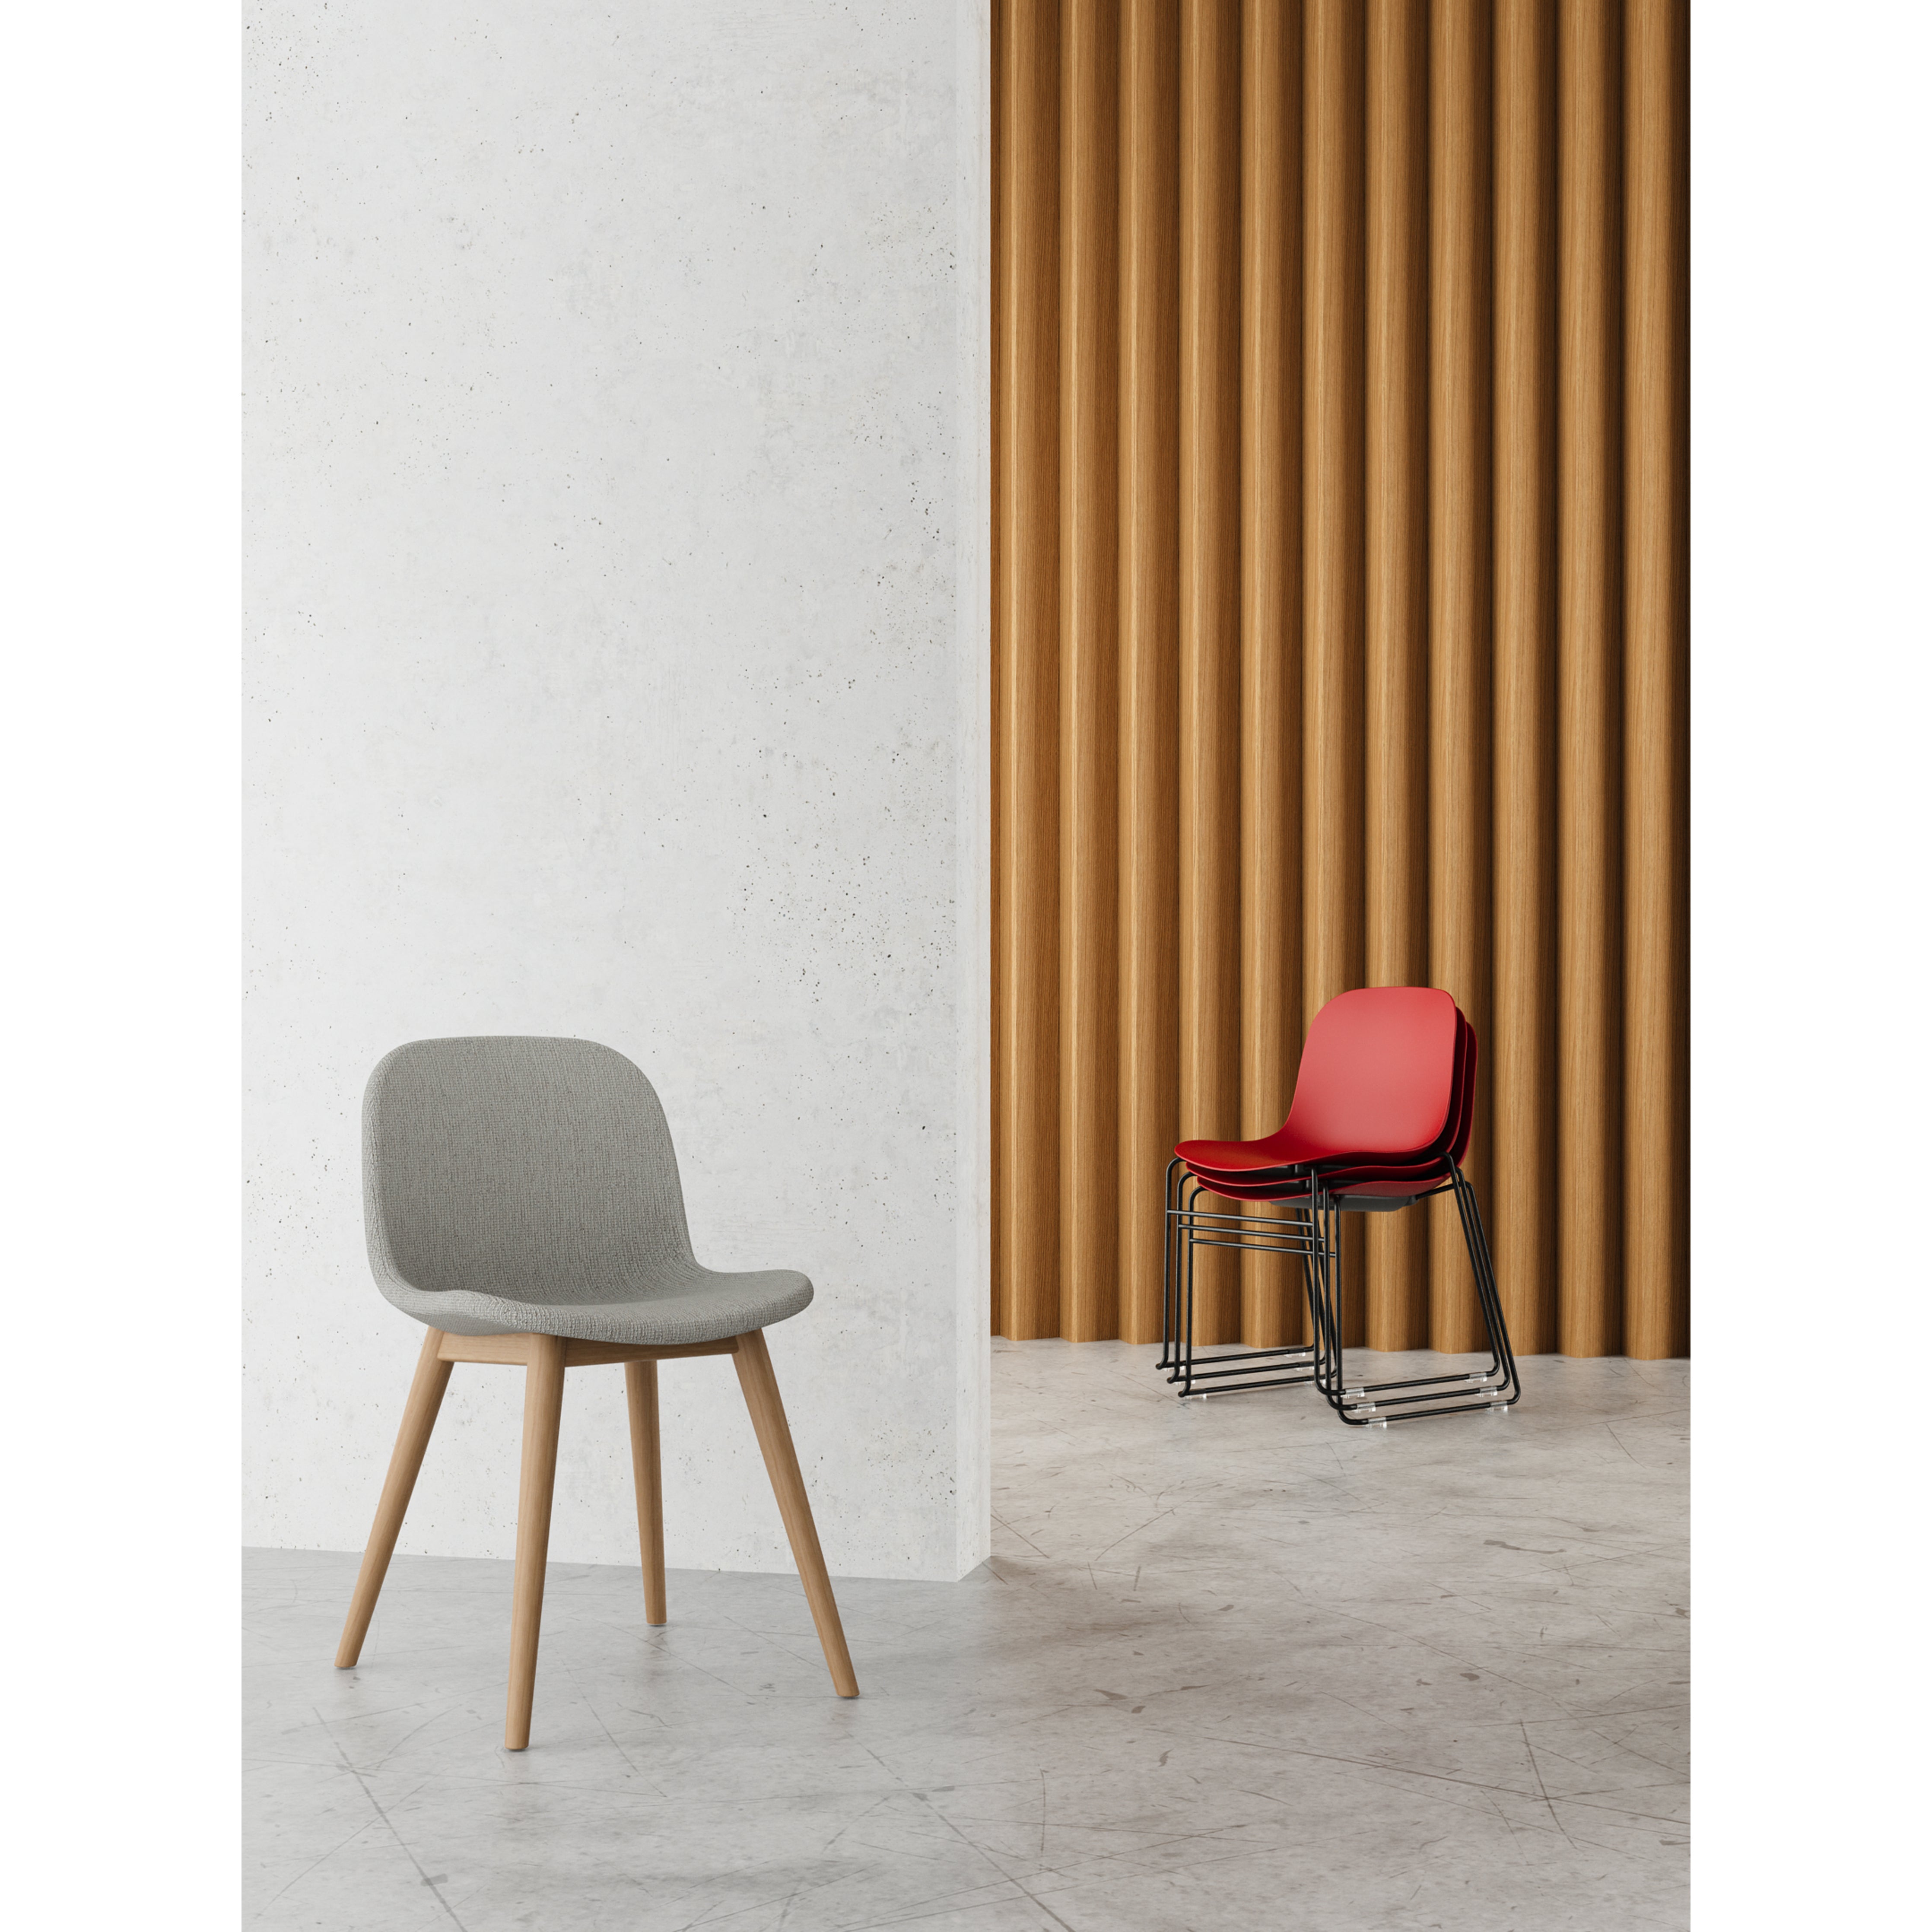 Layer Lite - Dining Chair